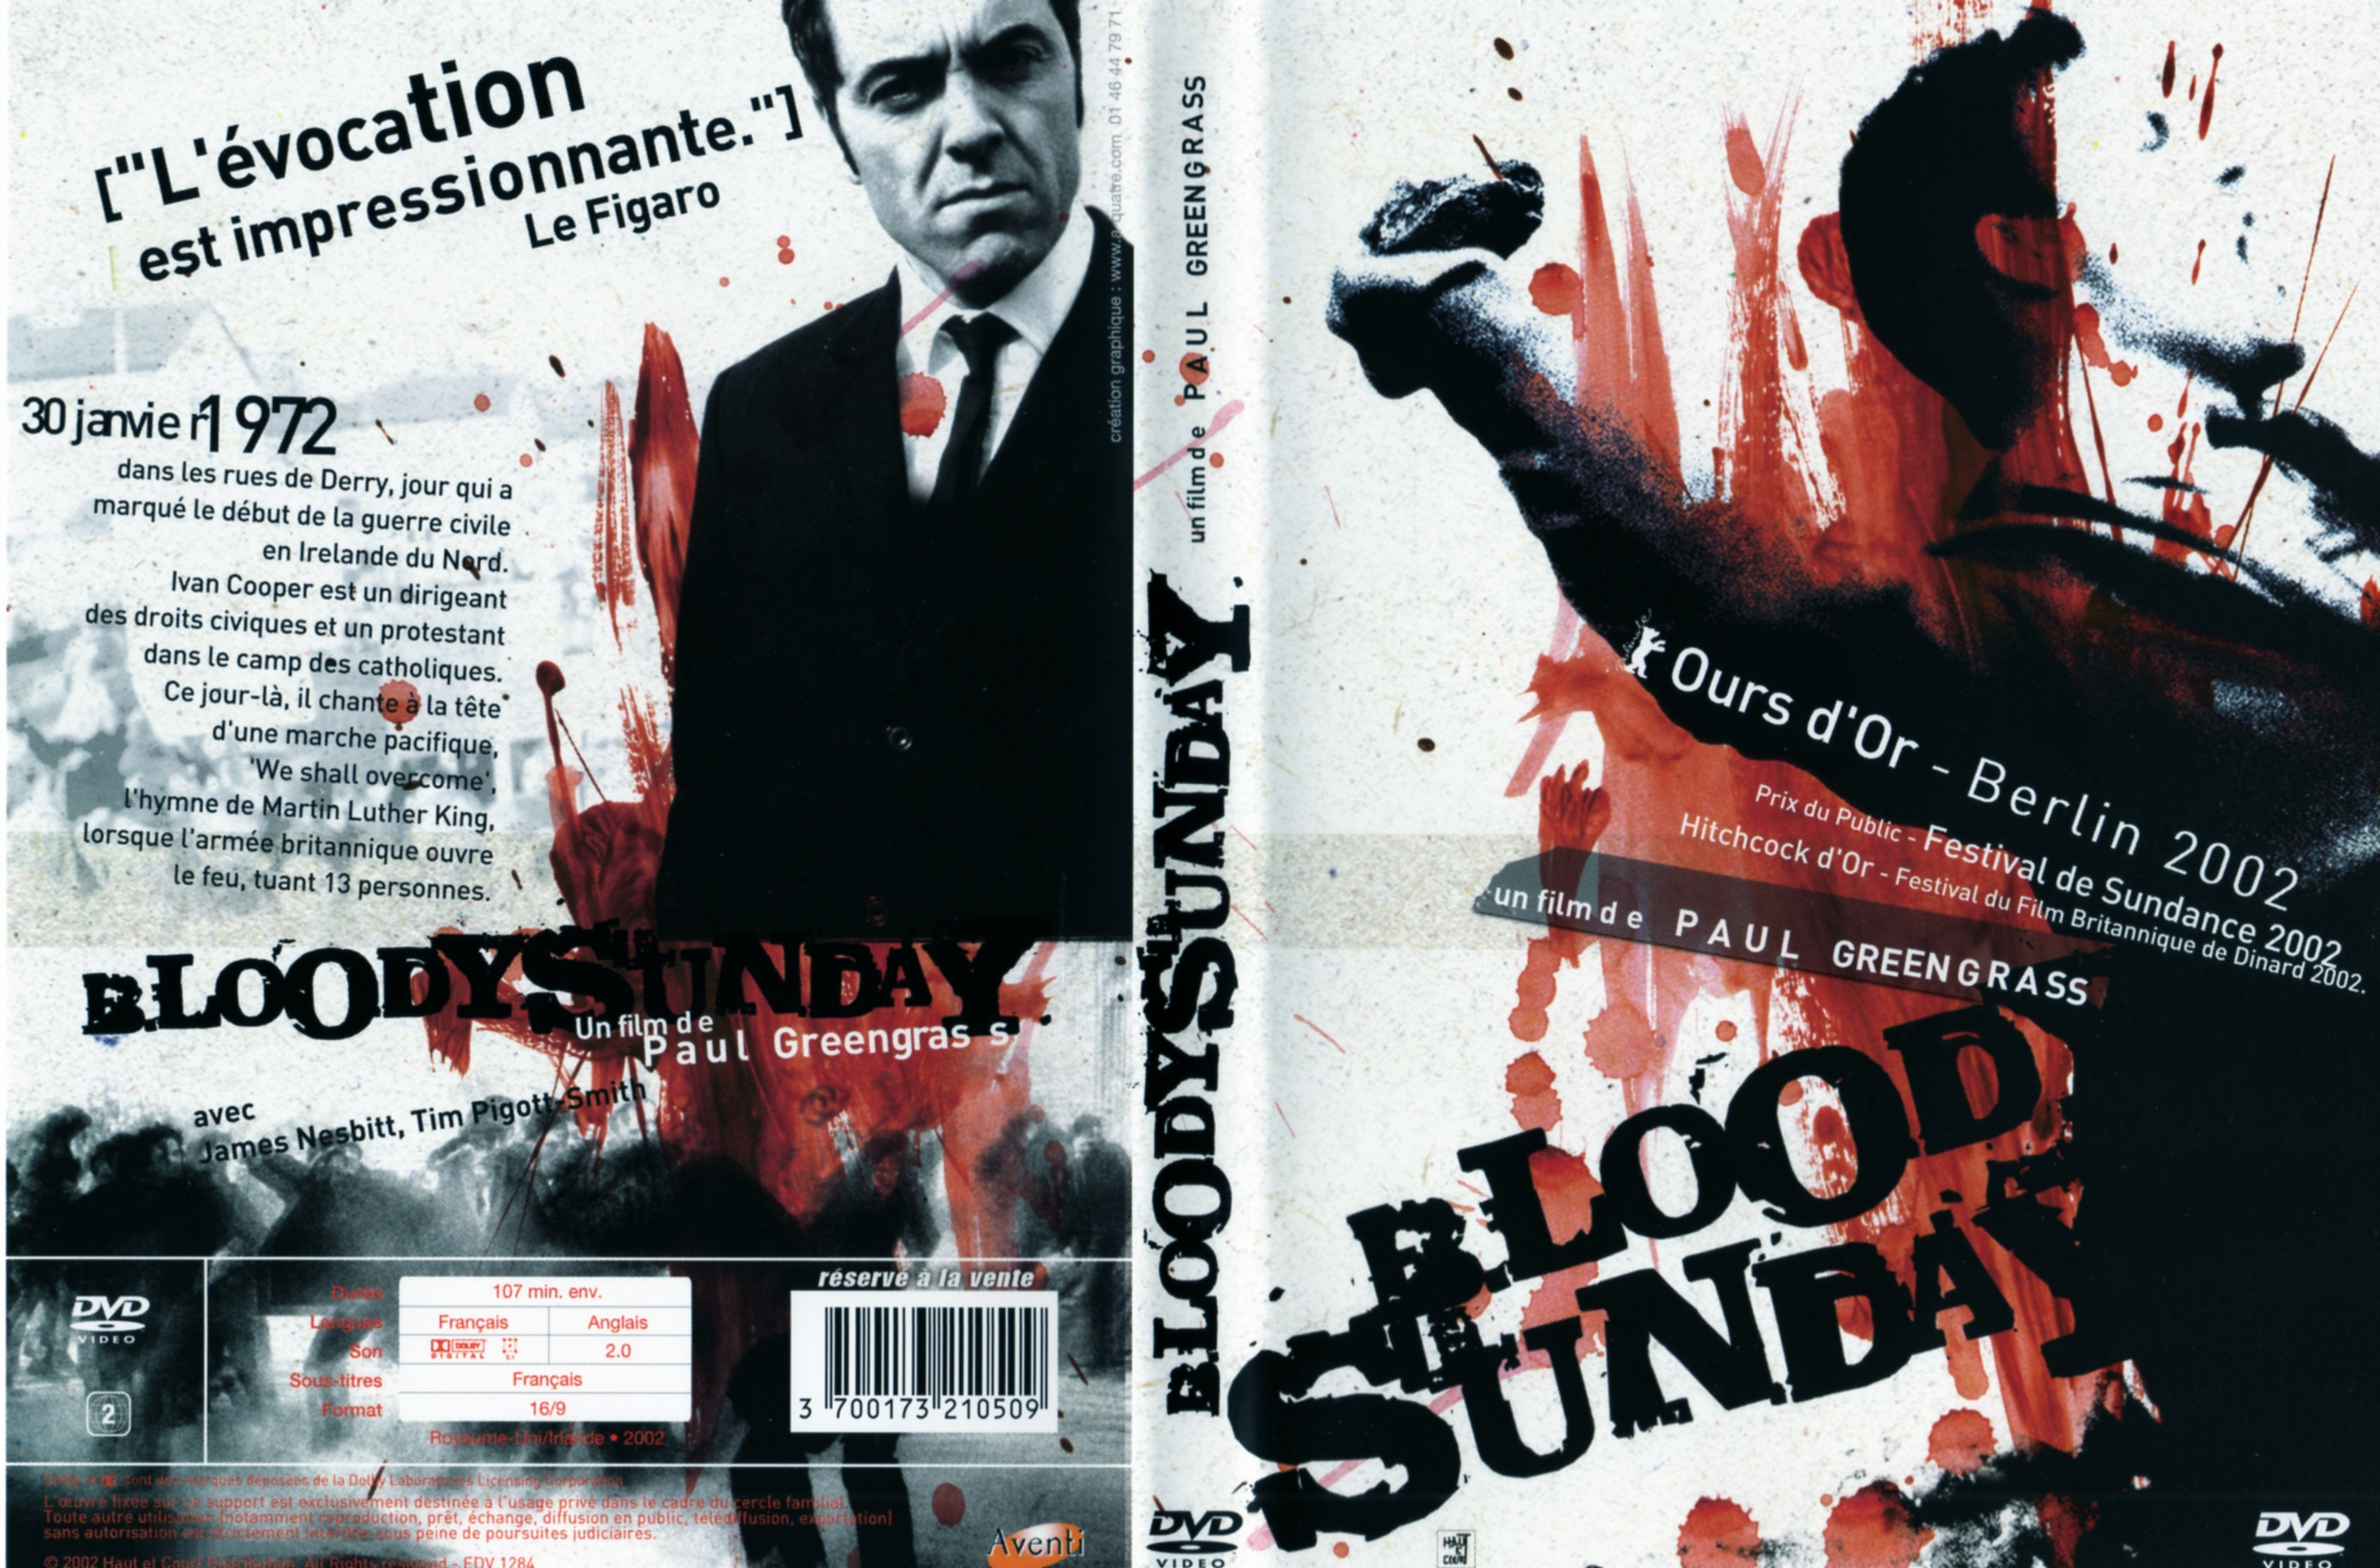 Jaquette DVD Bloody sunday